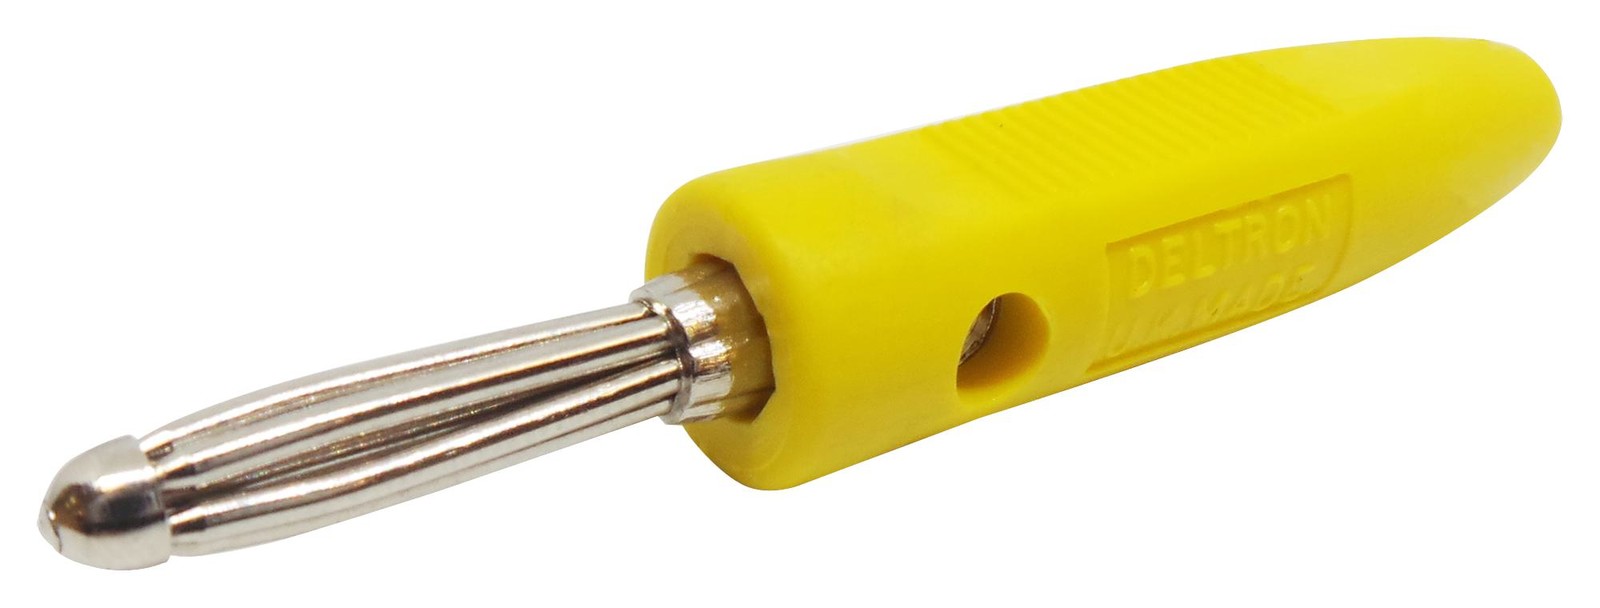 Deltron Components 555-0700-01 Plug, 4Mm, Bunch Pin, Yellow